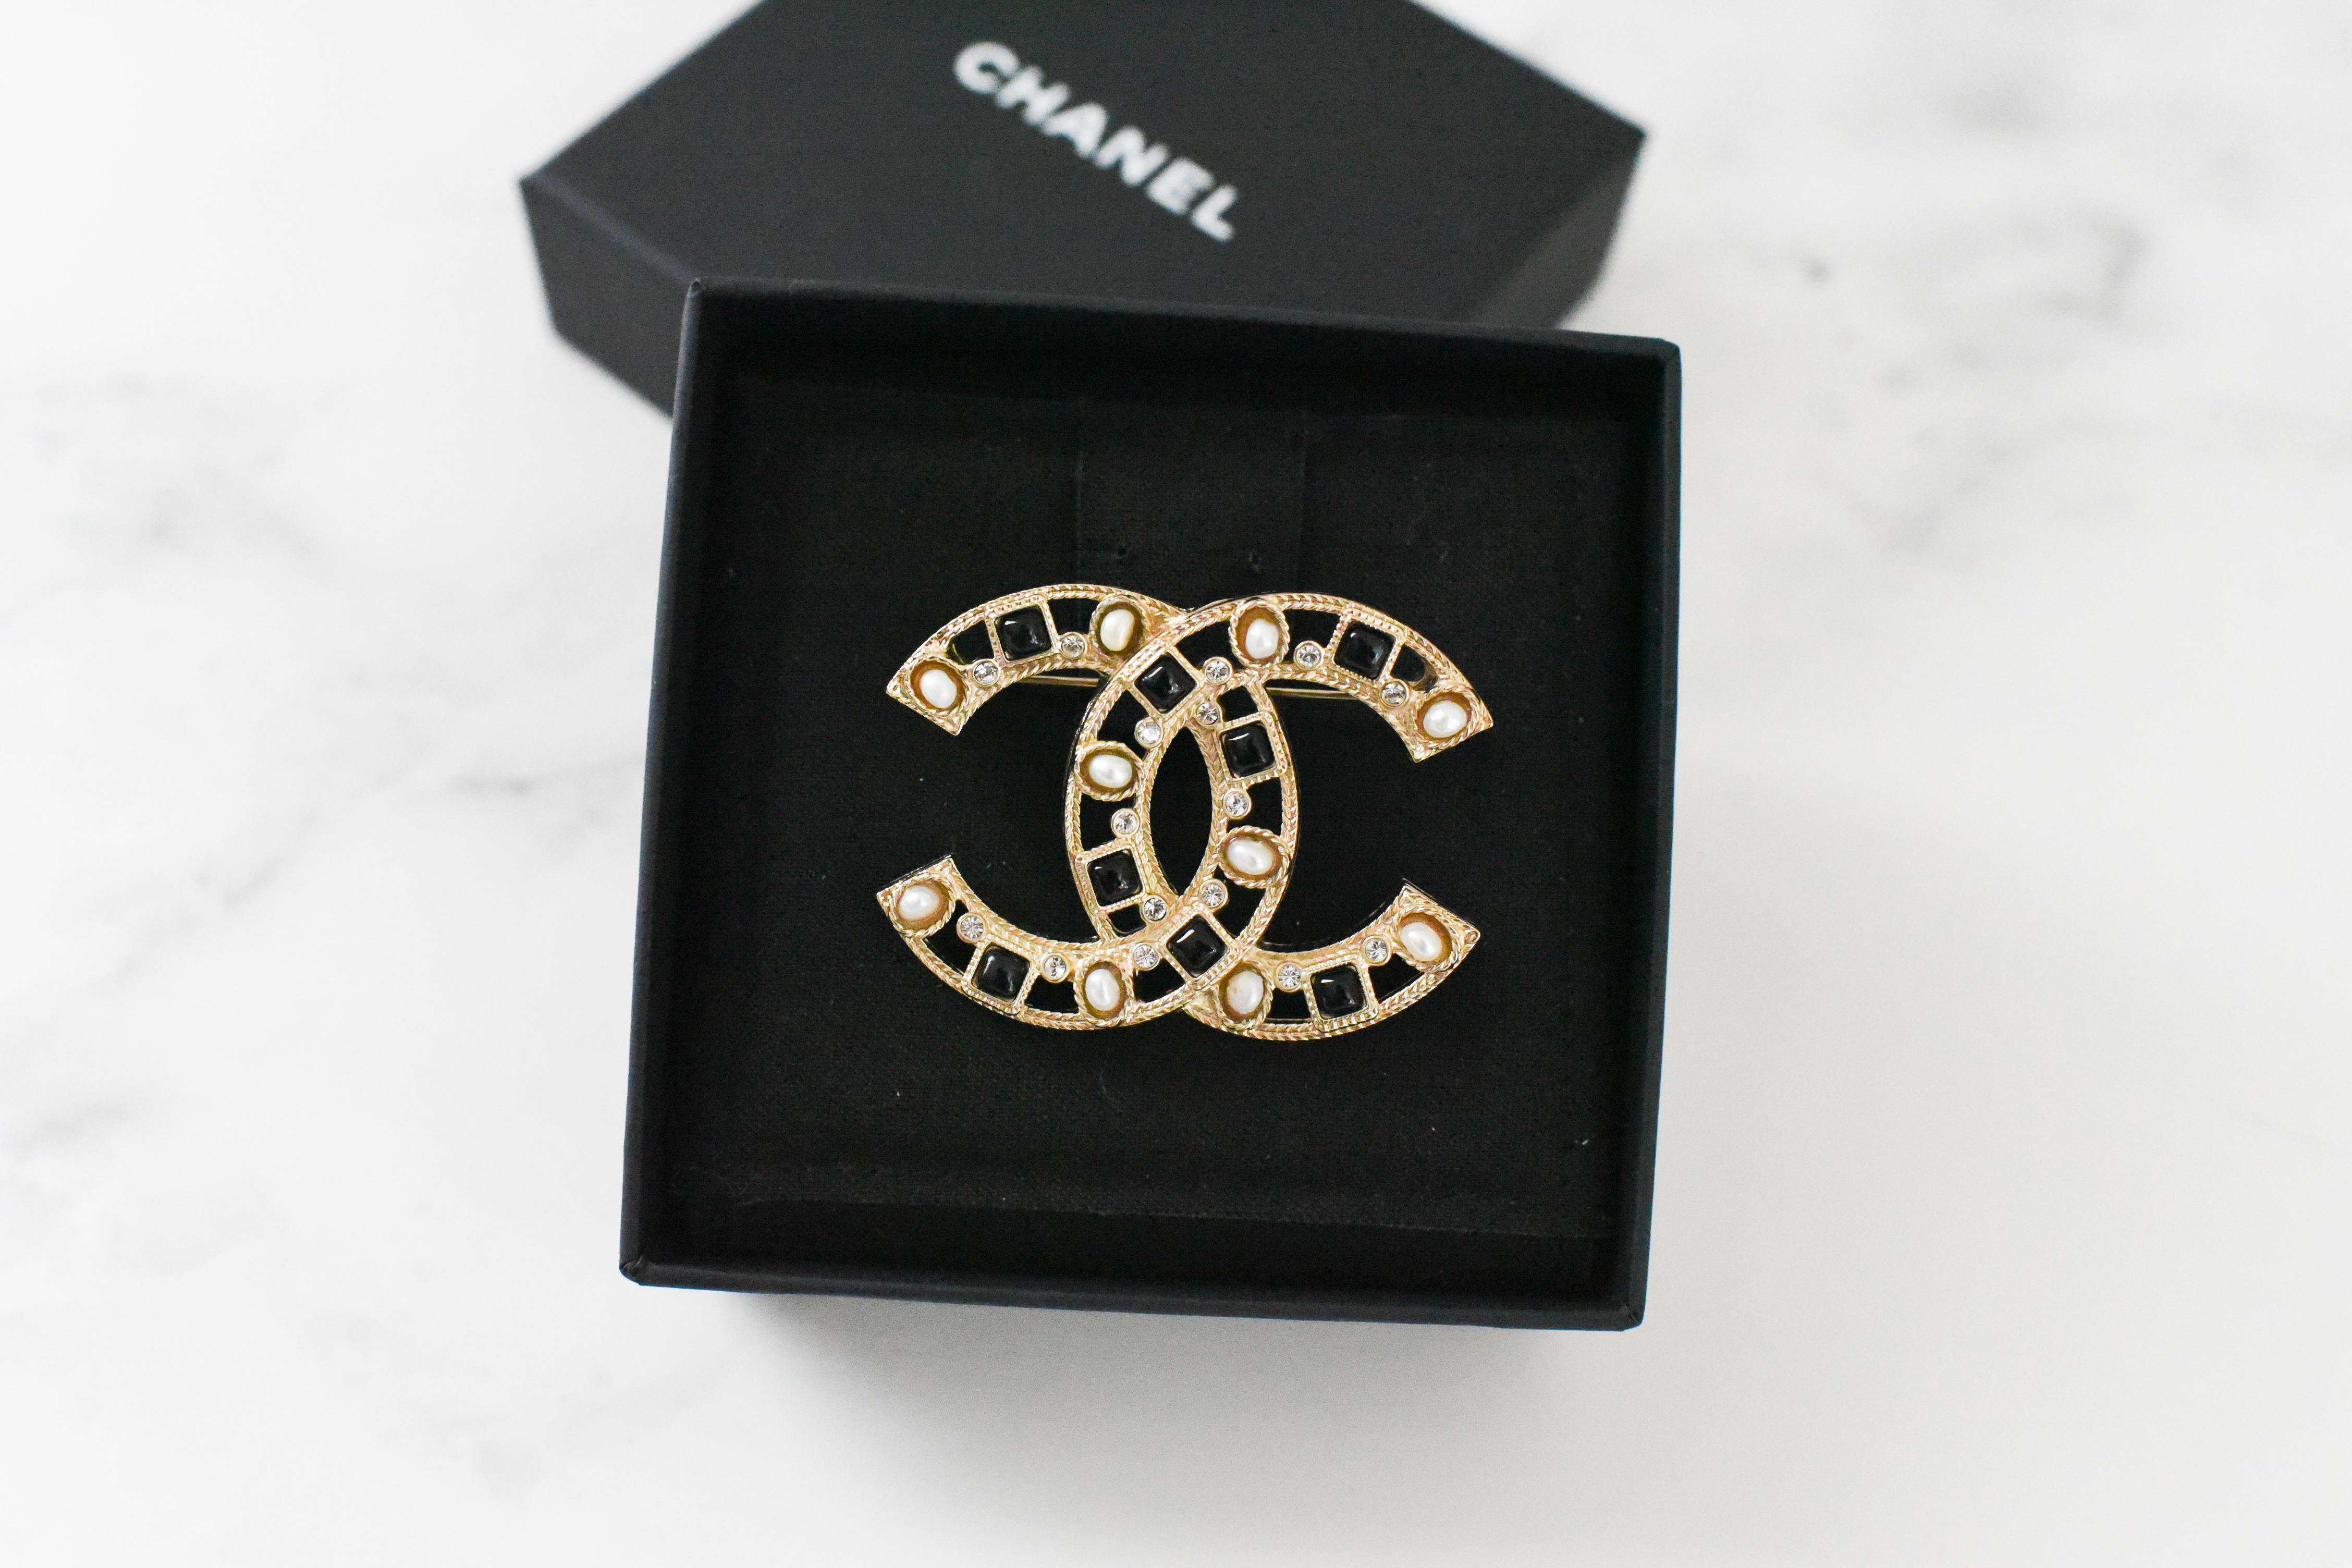 Chanel CC Brooch in Gold with Crystals, Pearls & Black Stones, New